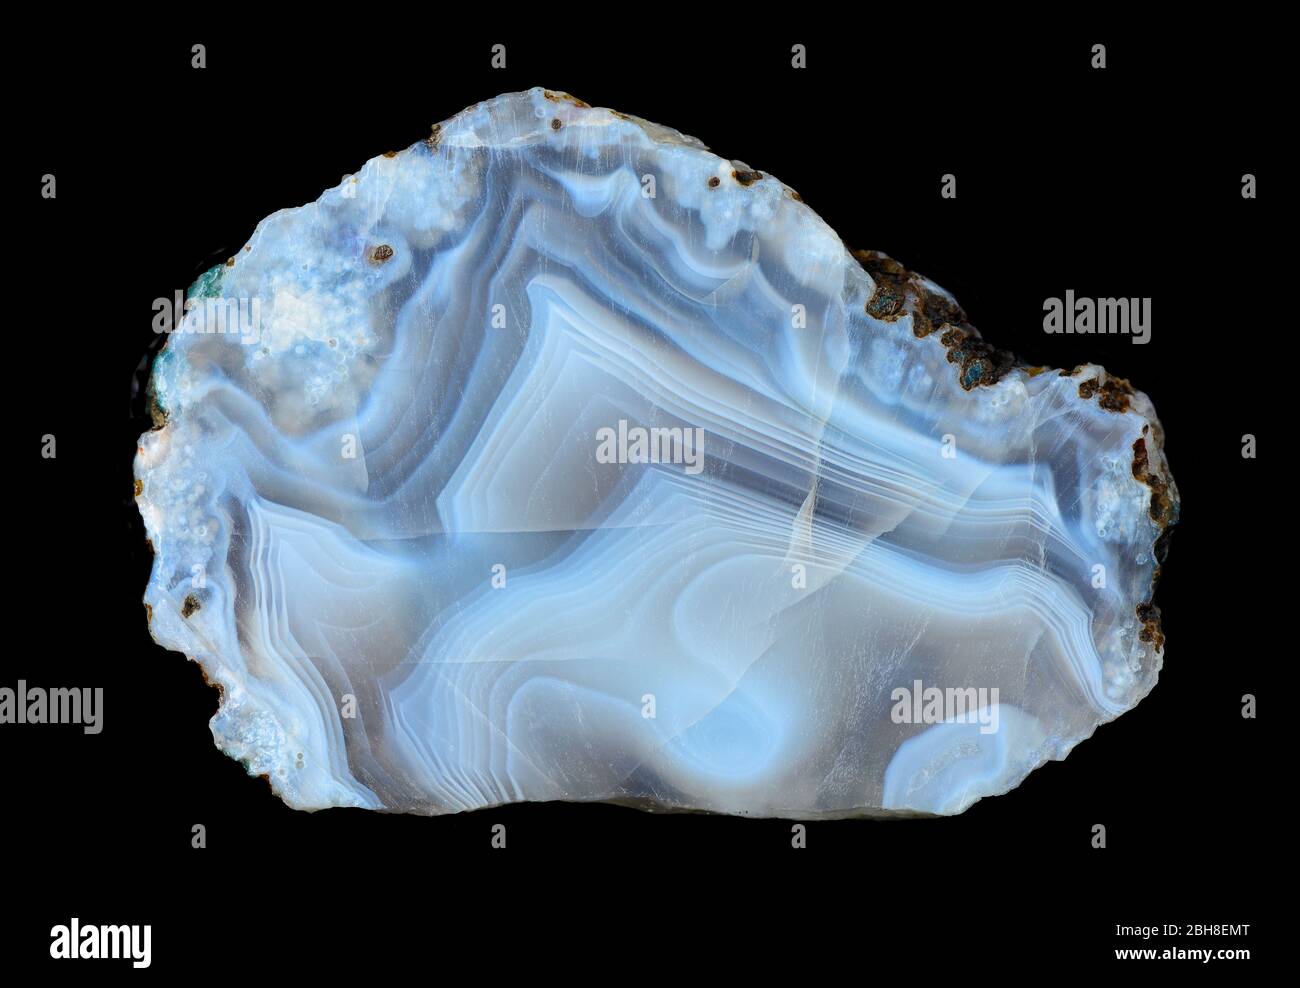 Slice of blue agate geodes with concentric layers, isolated on a black background Stock Photo